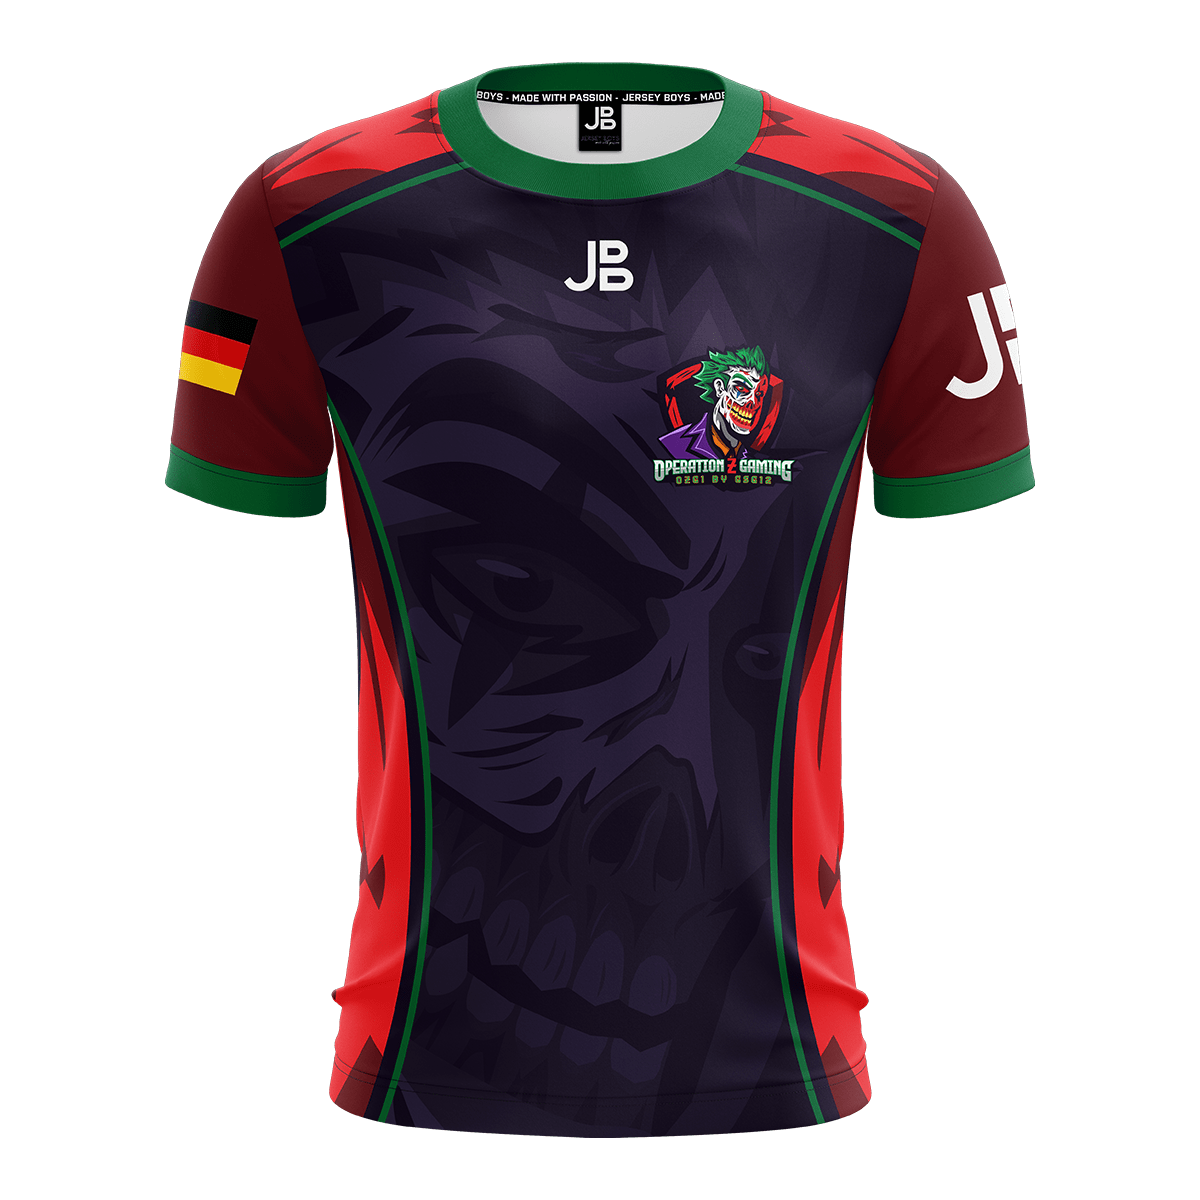 OPERATION Z GAMING - Jersey 2021